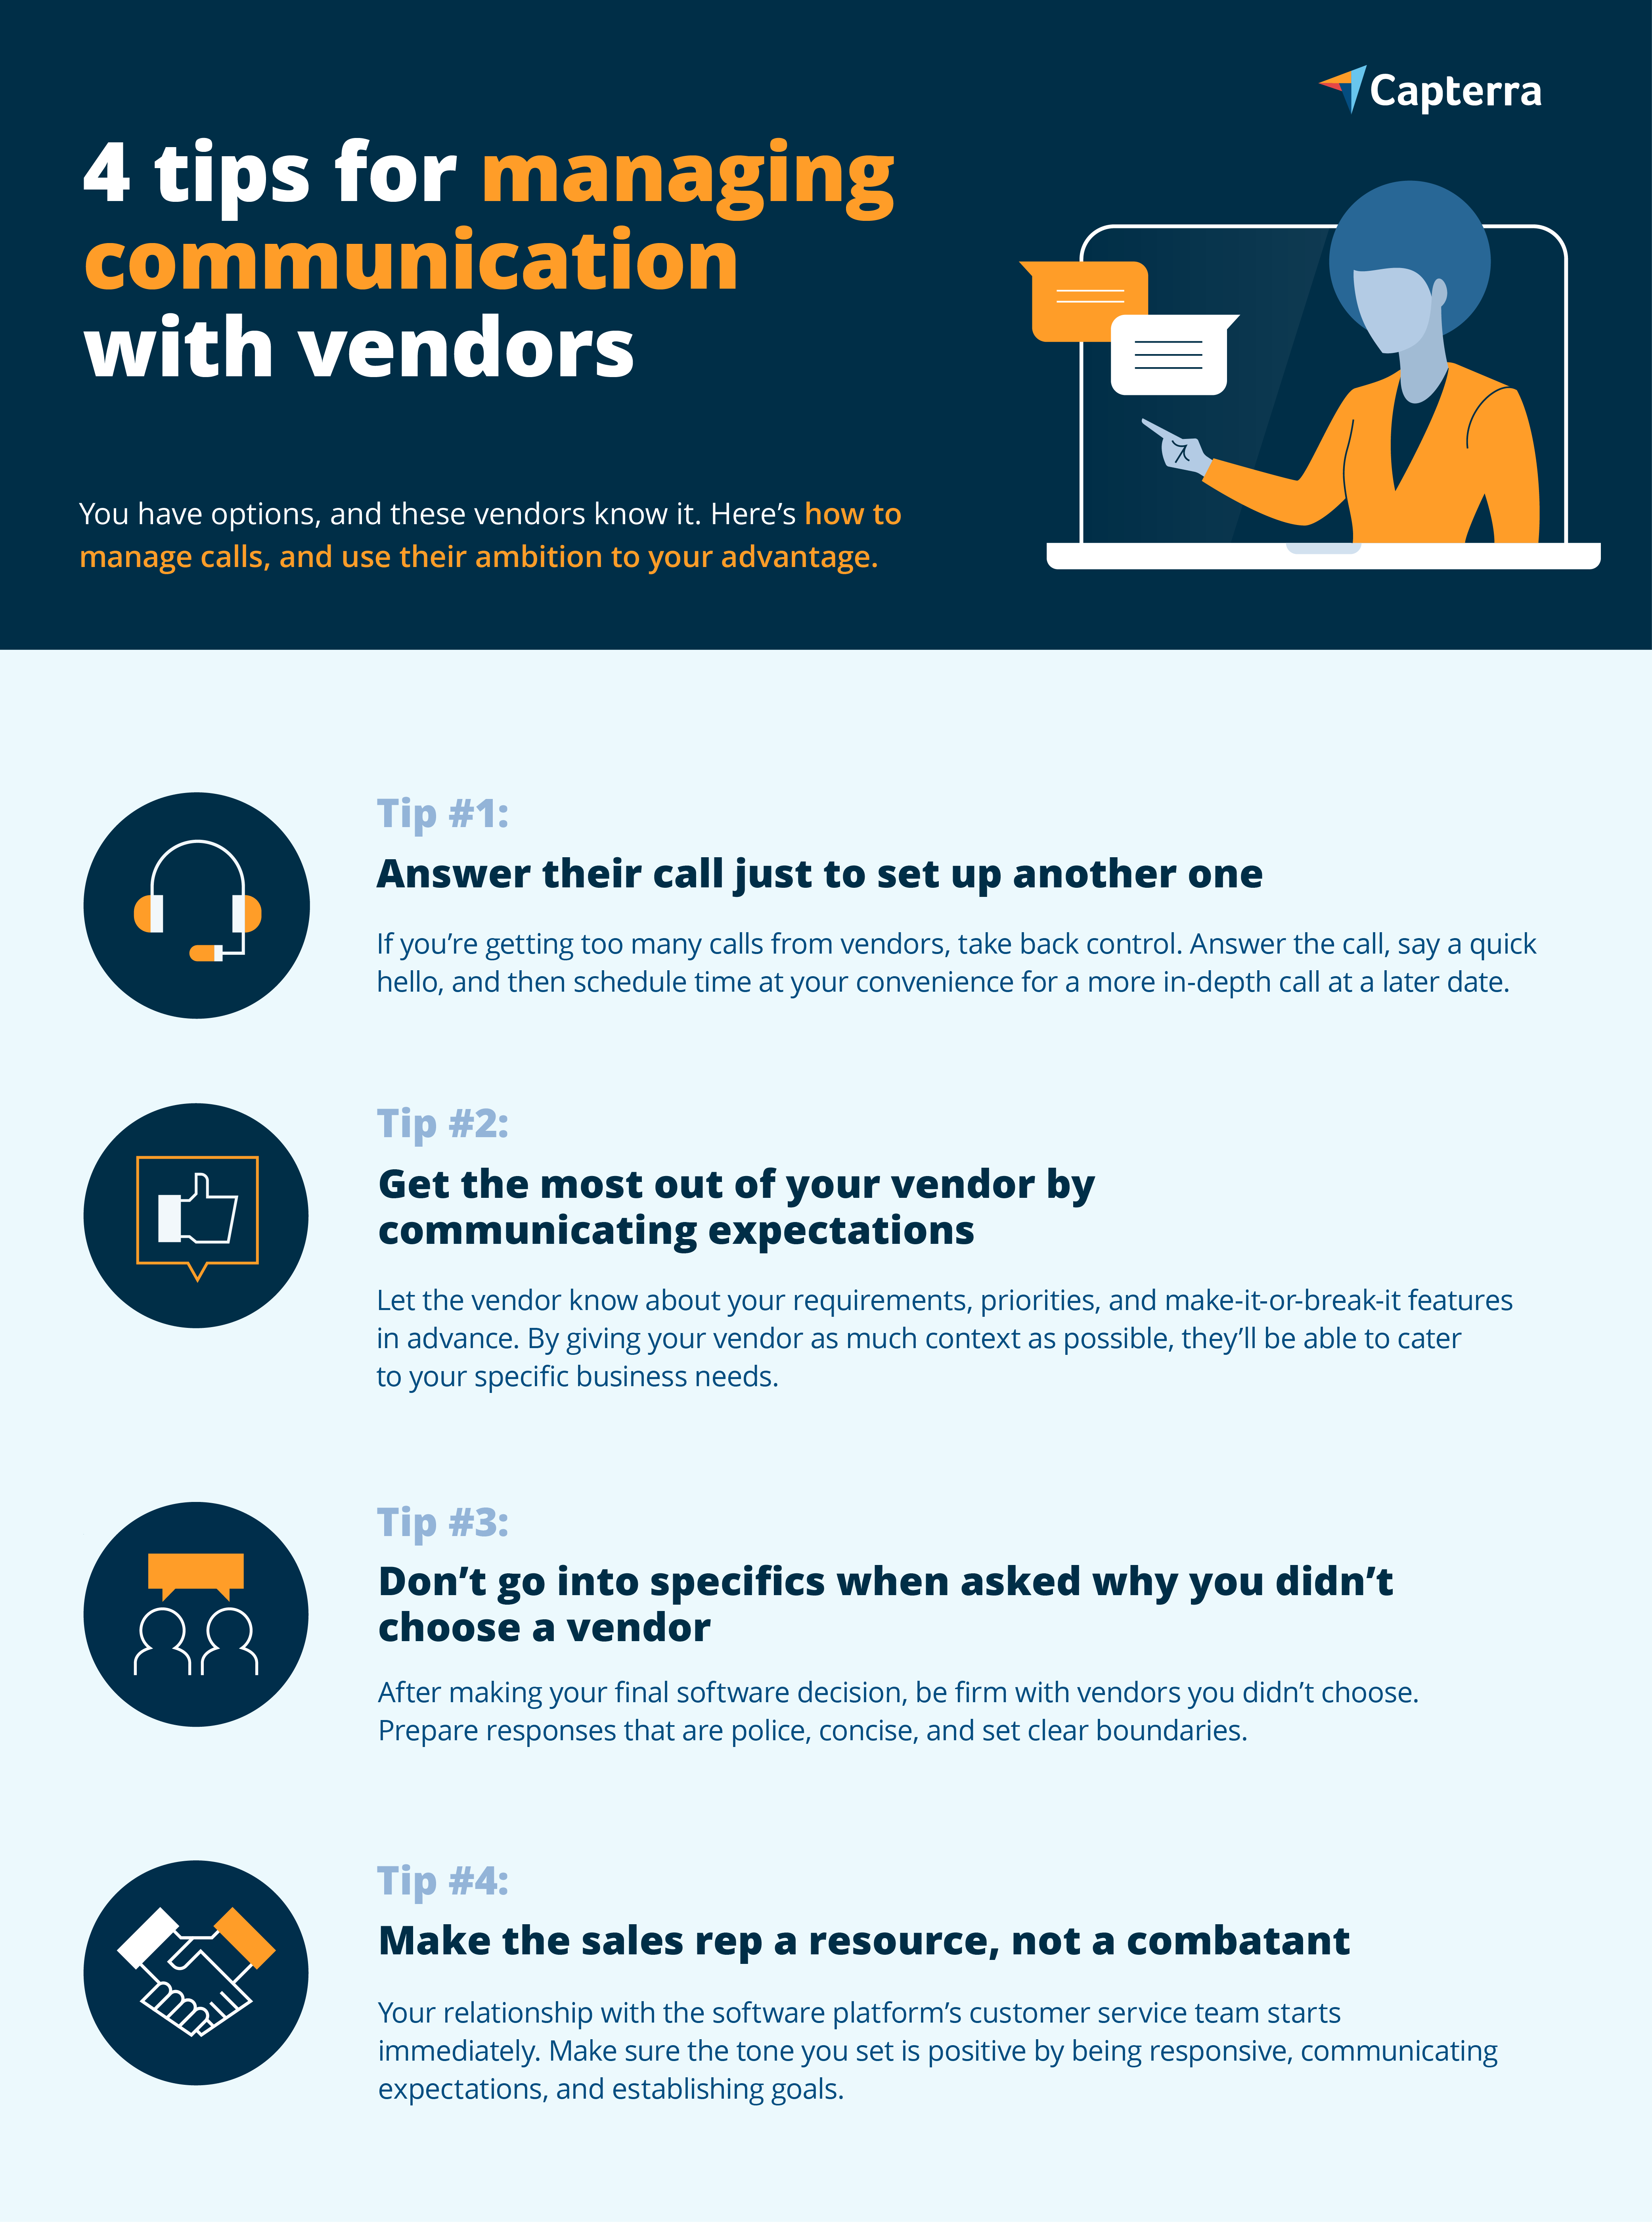 4 tips graphic for the blog article "How To Communicate With Software Vendors During the Purchase Process "